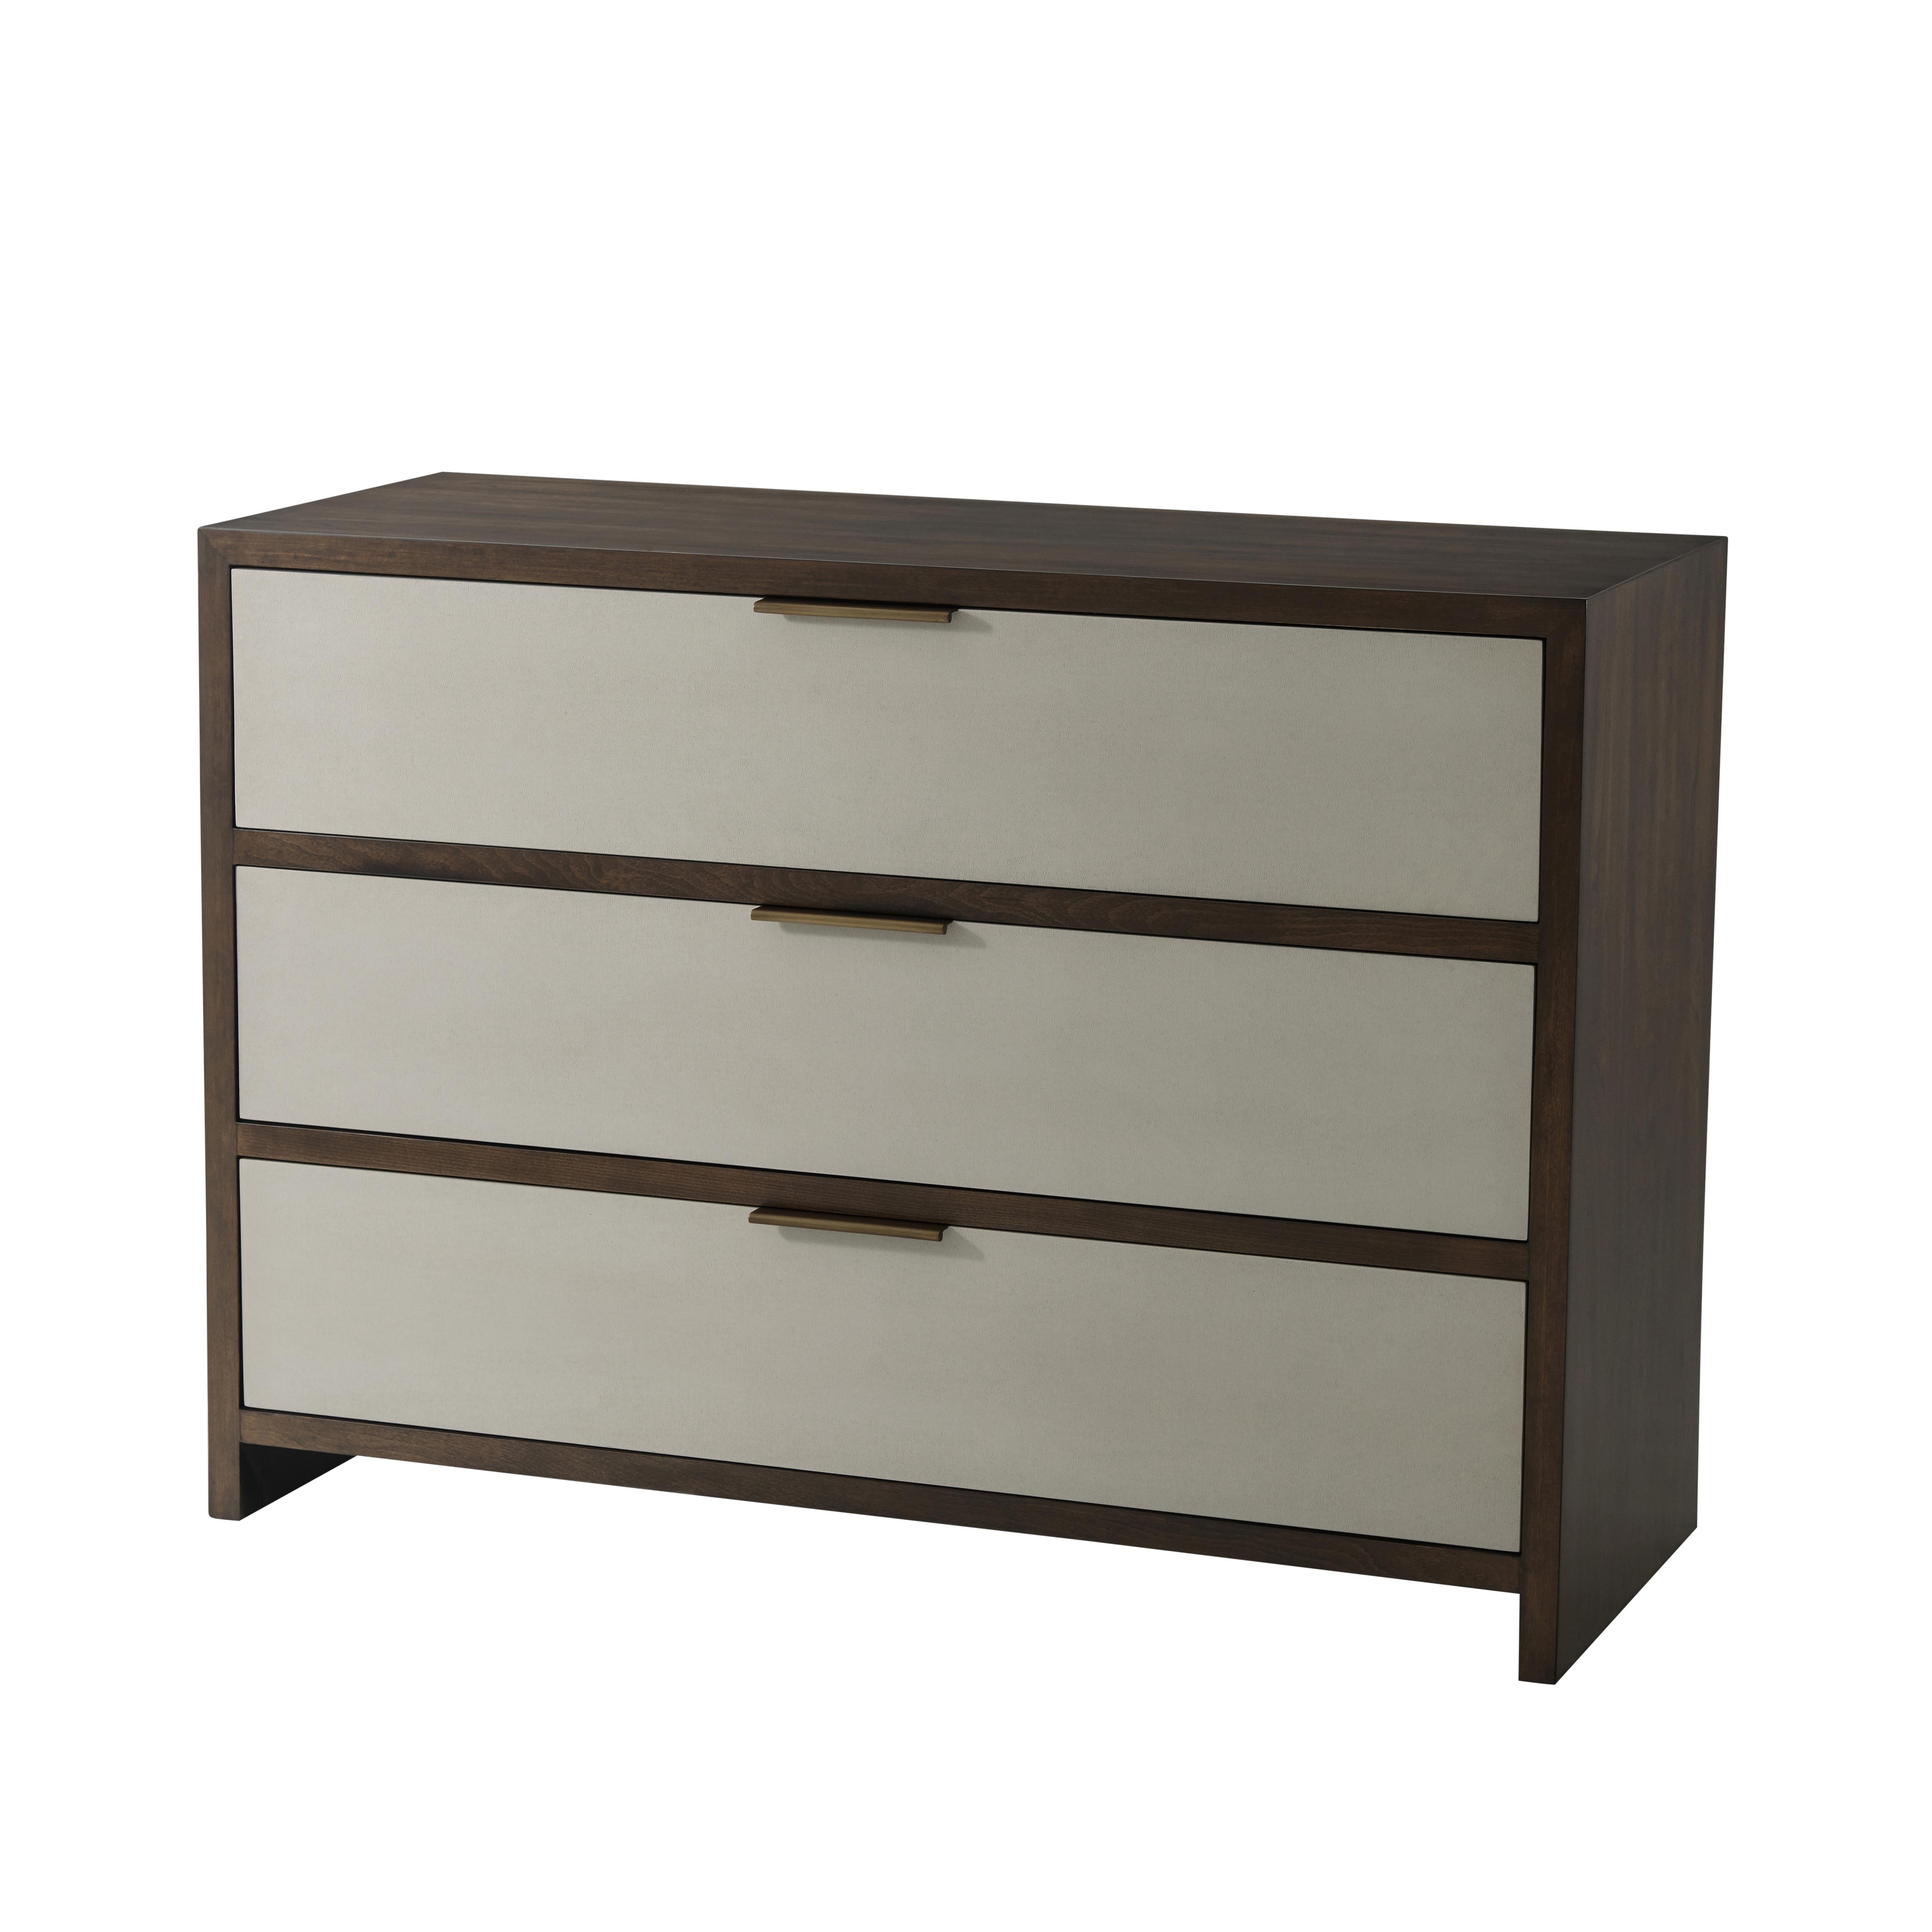 GRAYSON CHEST OF DRAWERS